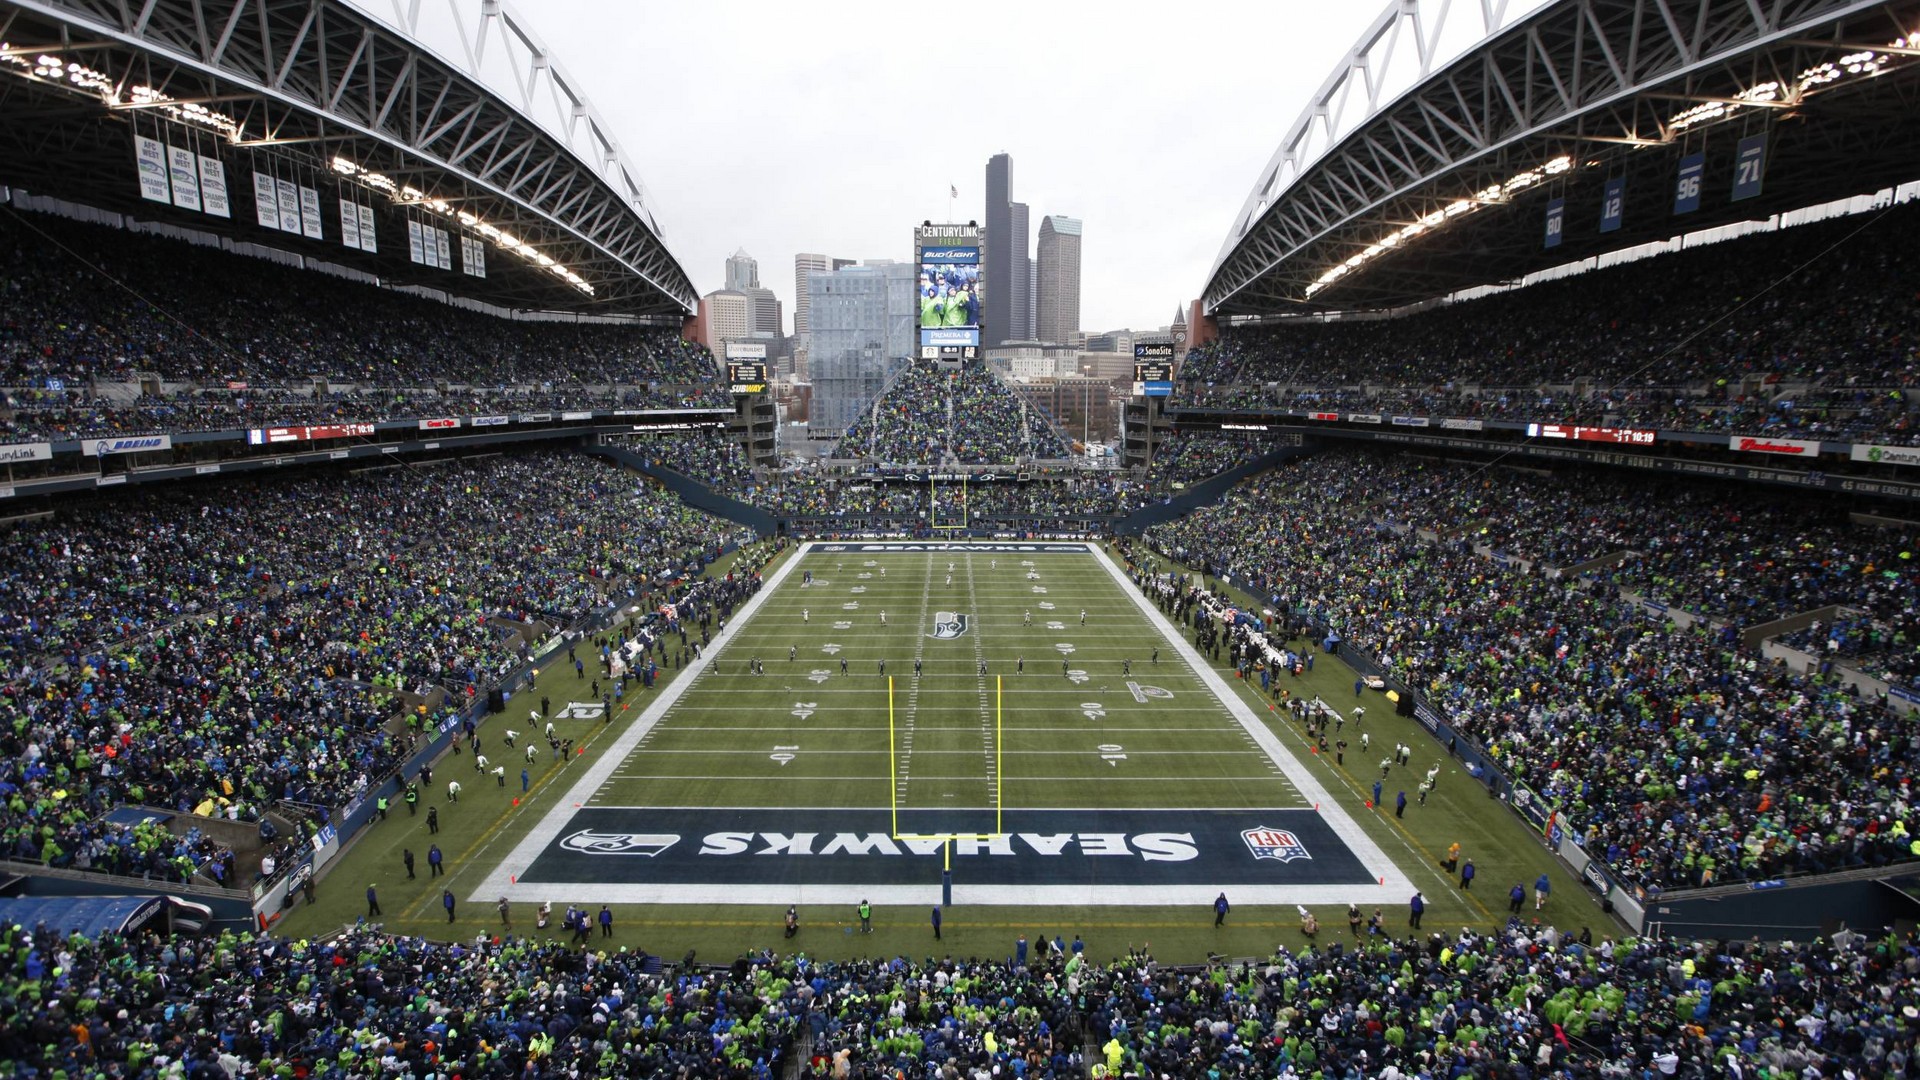 Windows Wallpaper Seattle Seahawks with high-resolution 1920x1080 pixel. You can use this wallpaper for your Mac or Windows Desktop Background, iPhone, Android or Tablet and another Smartphone device